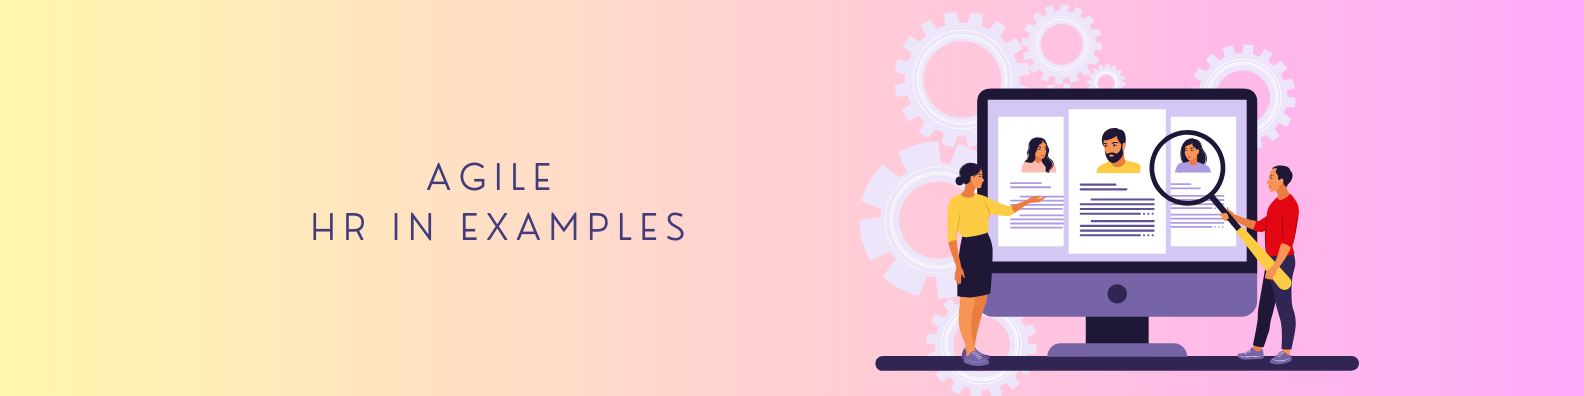 small banner for Agile HR in examples 